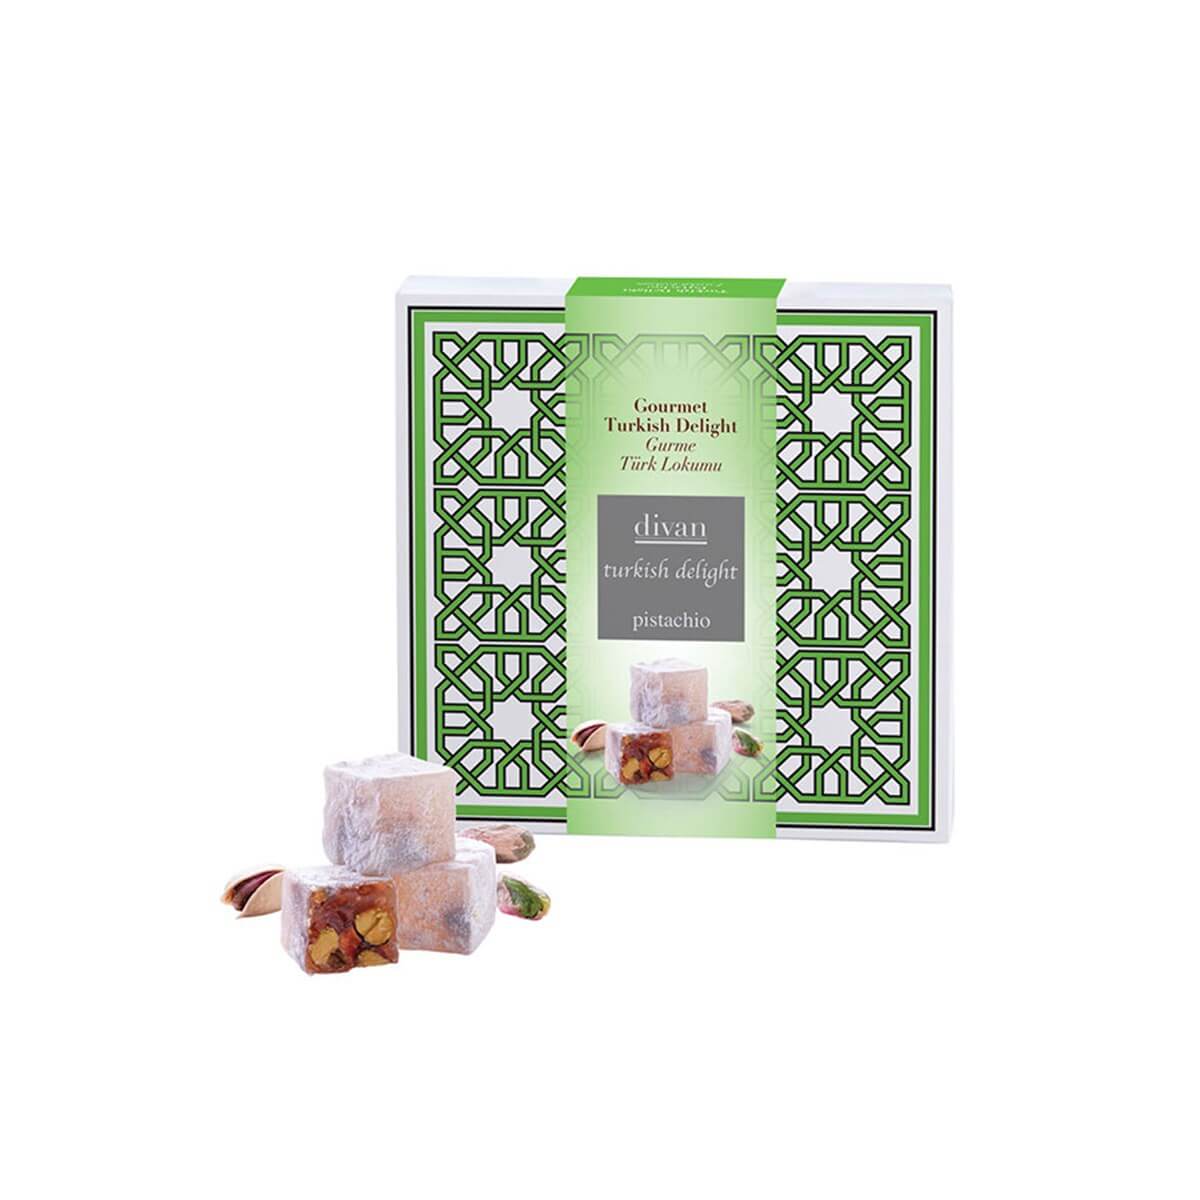 Divan Turkish Delight with Pistachio 250g - Shop Turkish Delight at  Baqqalia.com - Best Brands and Products - Free Worldwide Shipping Over $150